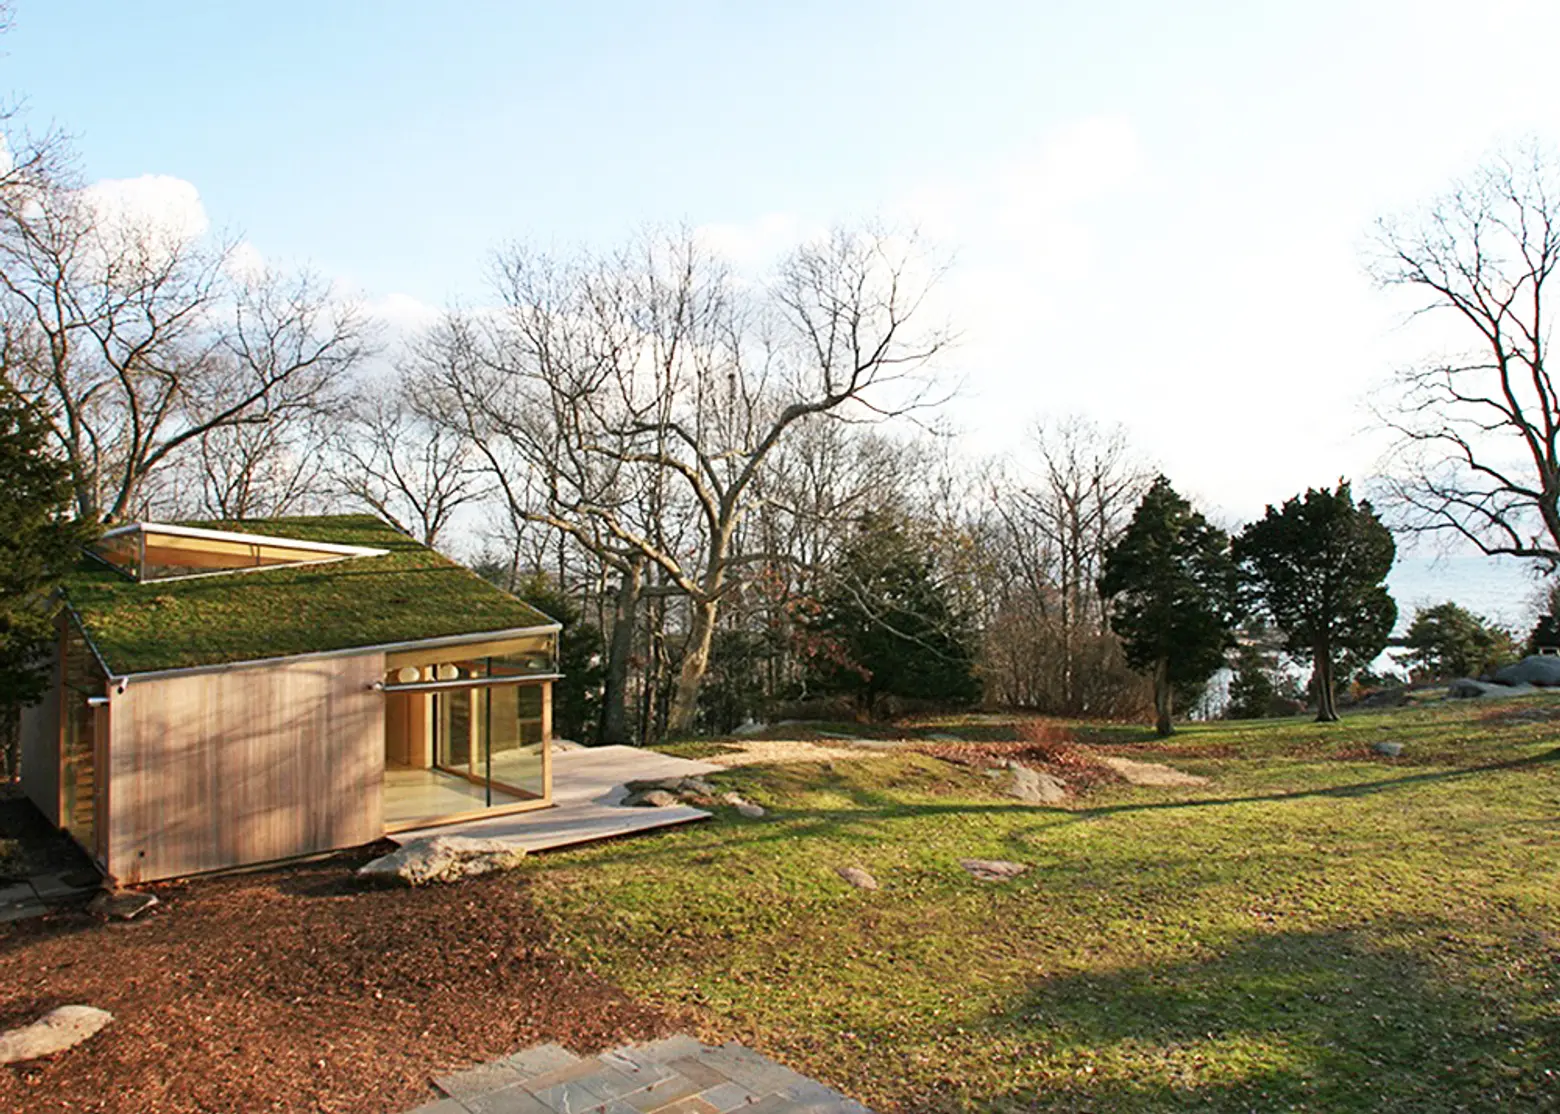 Tranquil Wooden Cottage by Gray Organschi Architecture is Topped by a Lush, Moss Roof